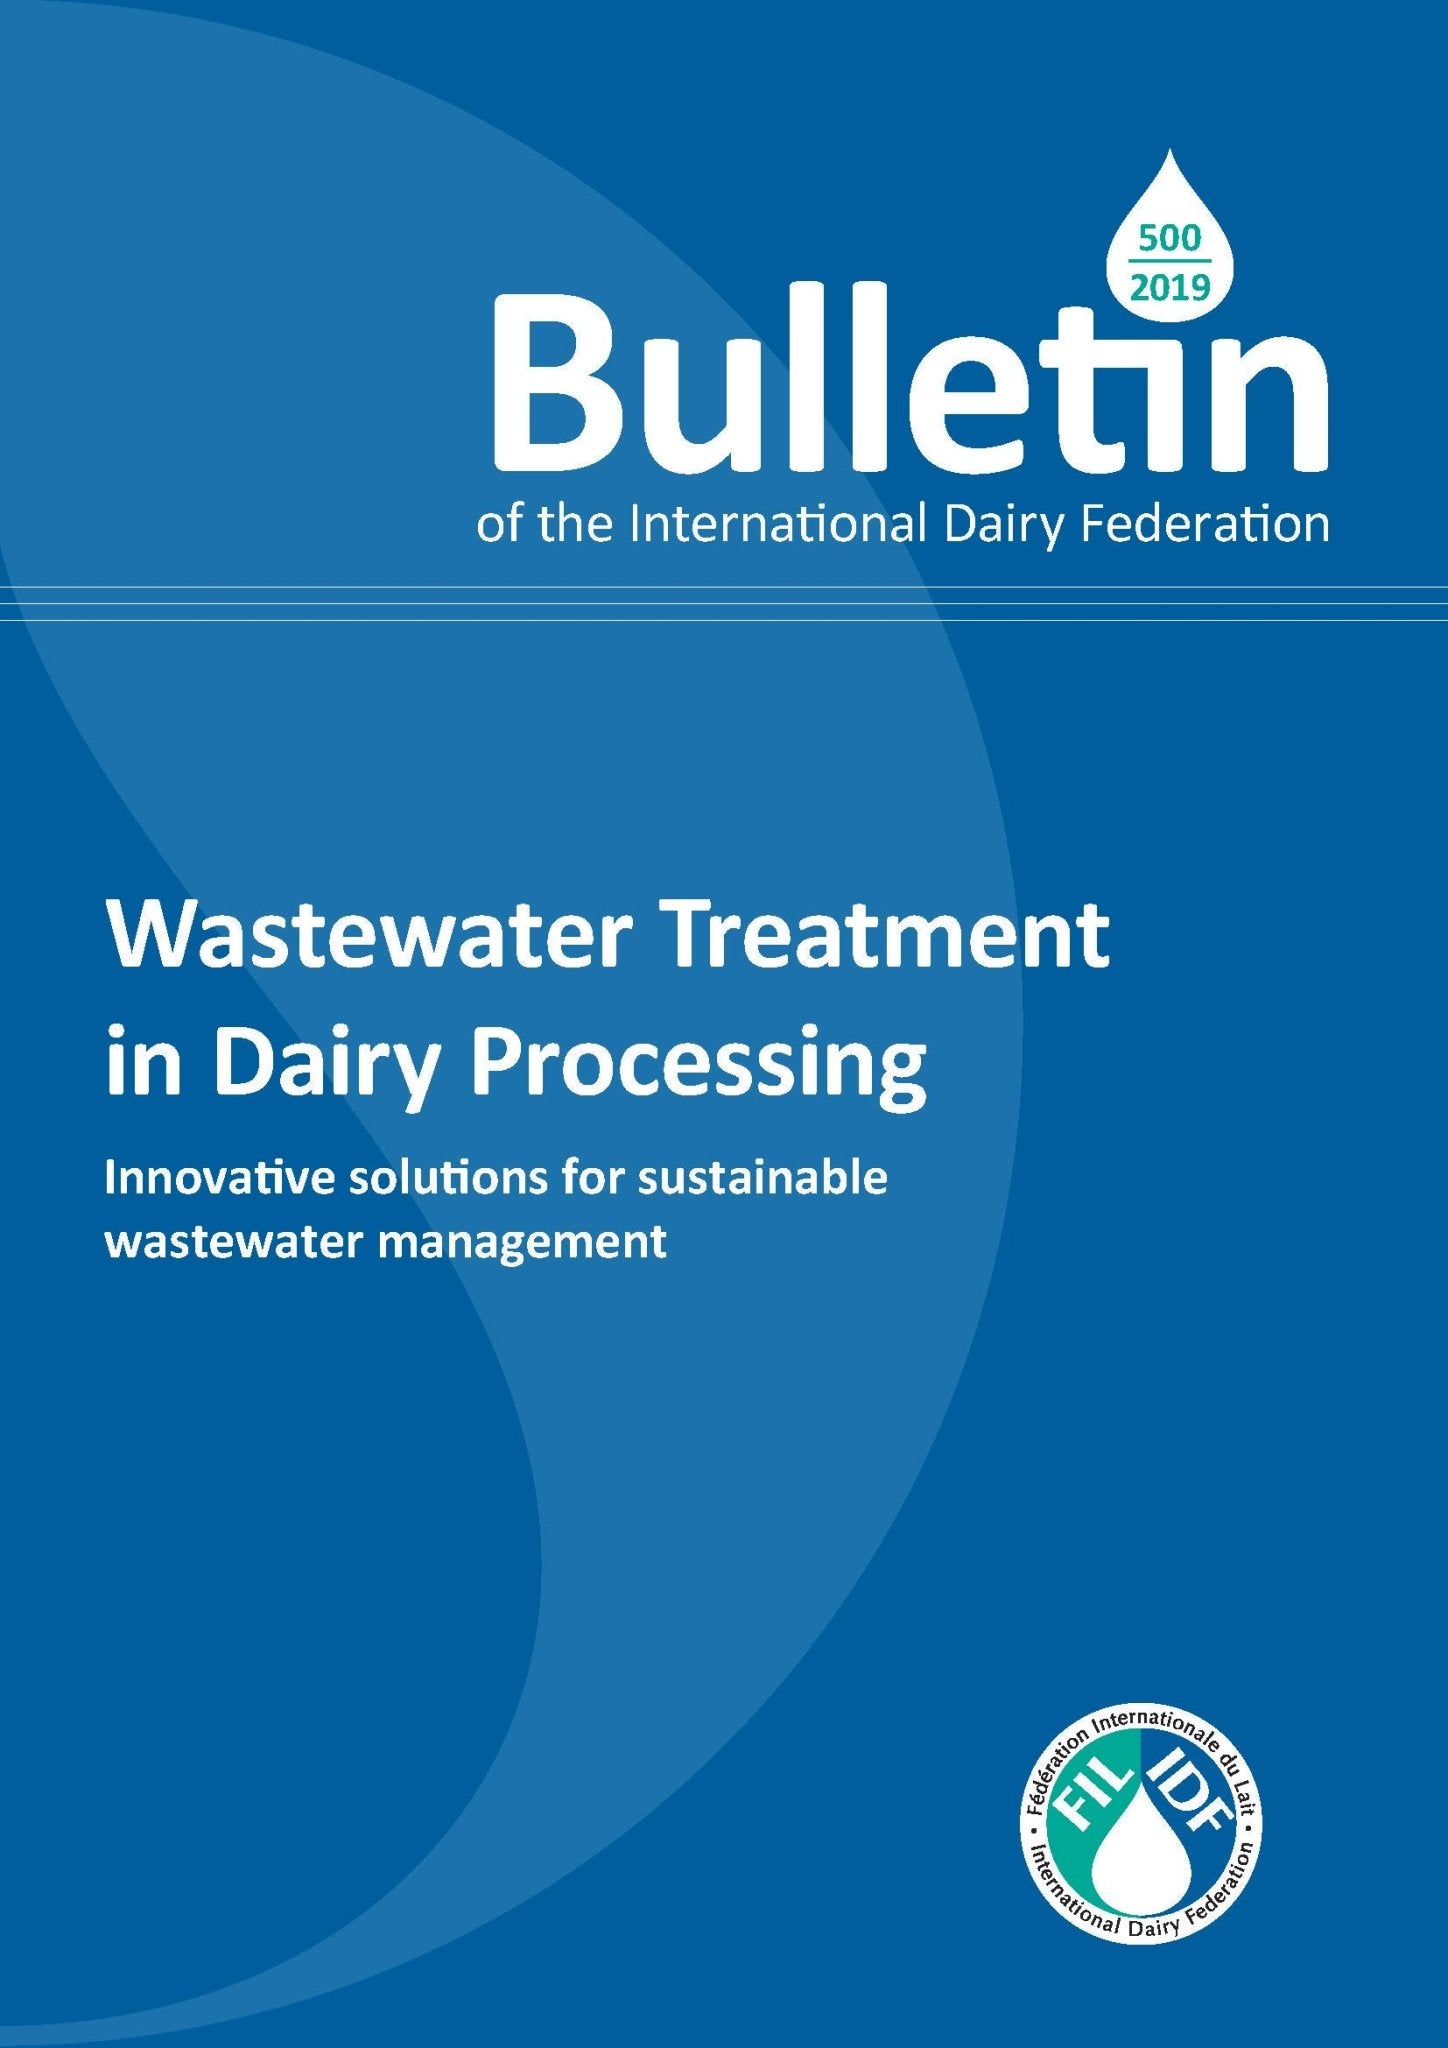 Bulletin of the IDF N° 500/ 2019: Wastewater Treatment in dairy Processing - FIL-IDF